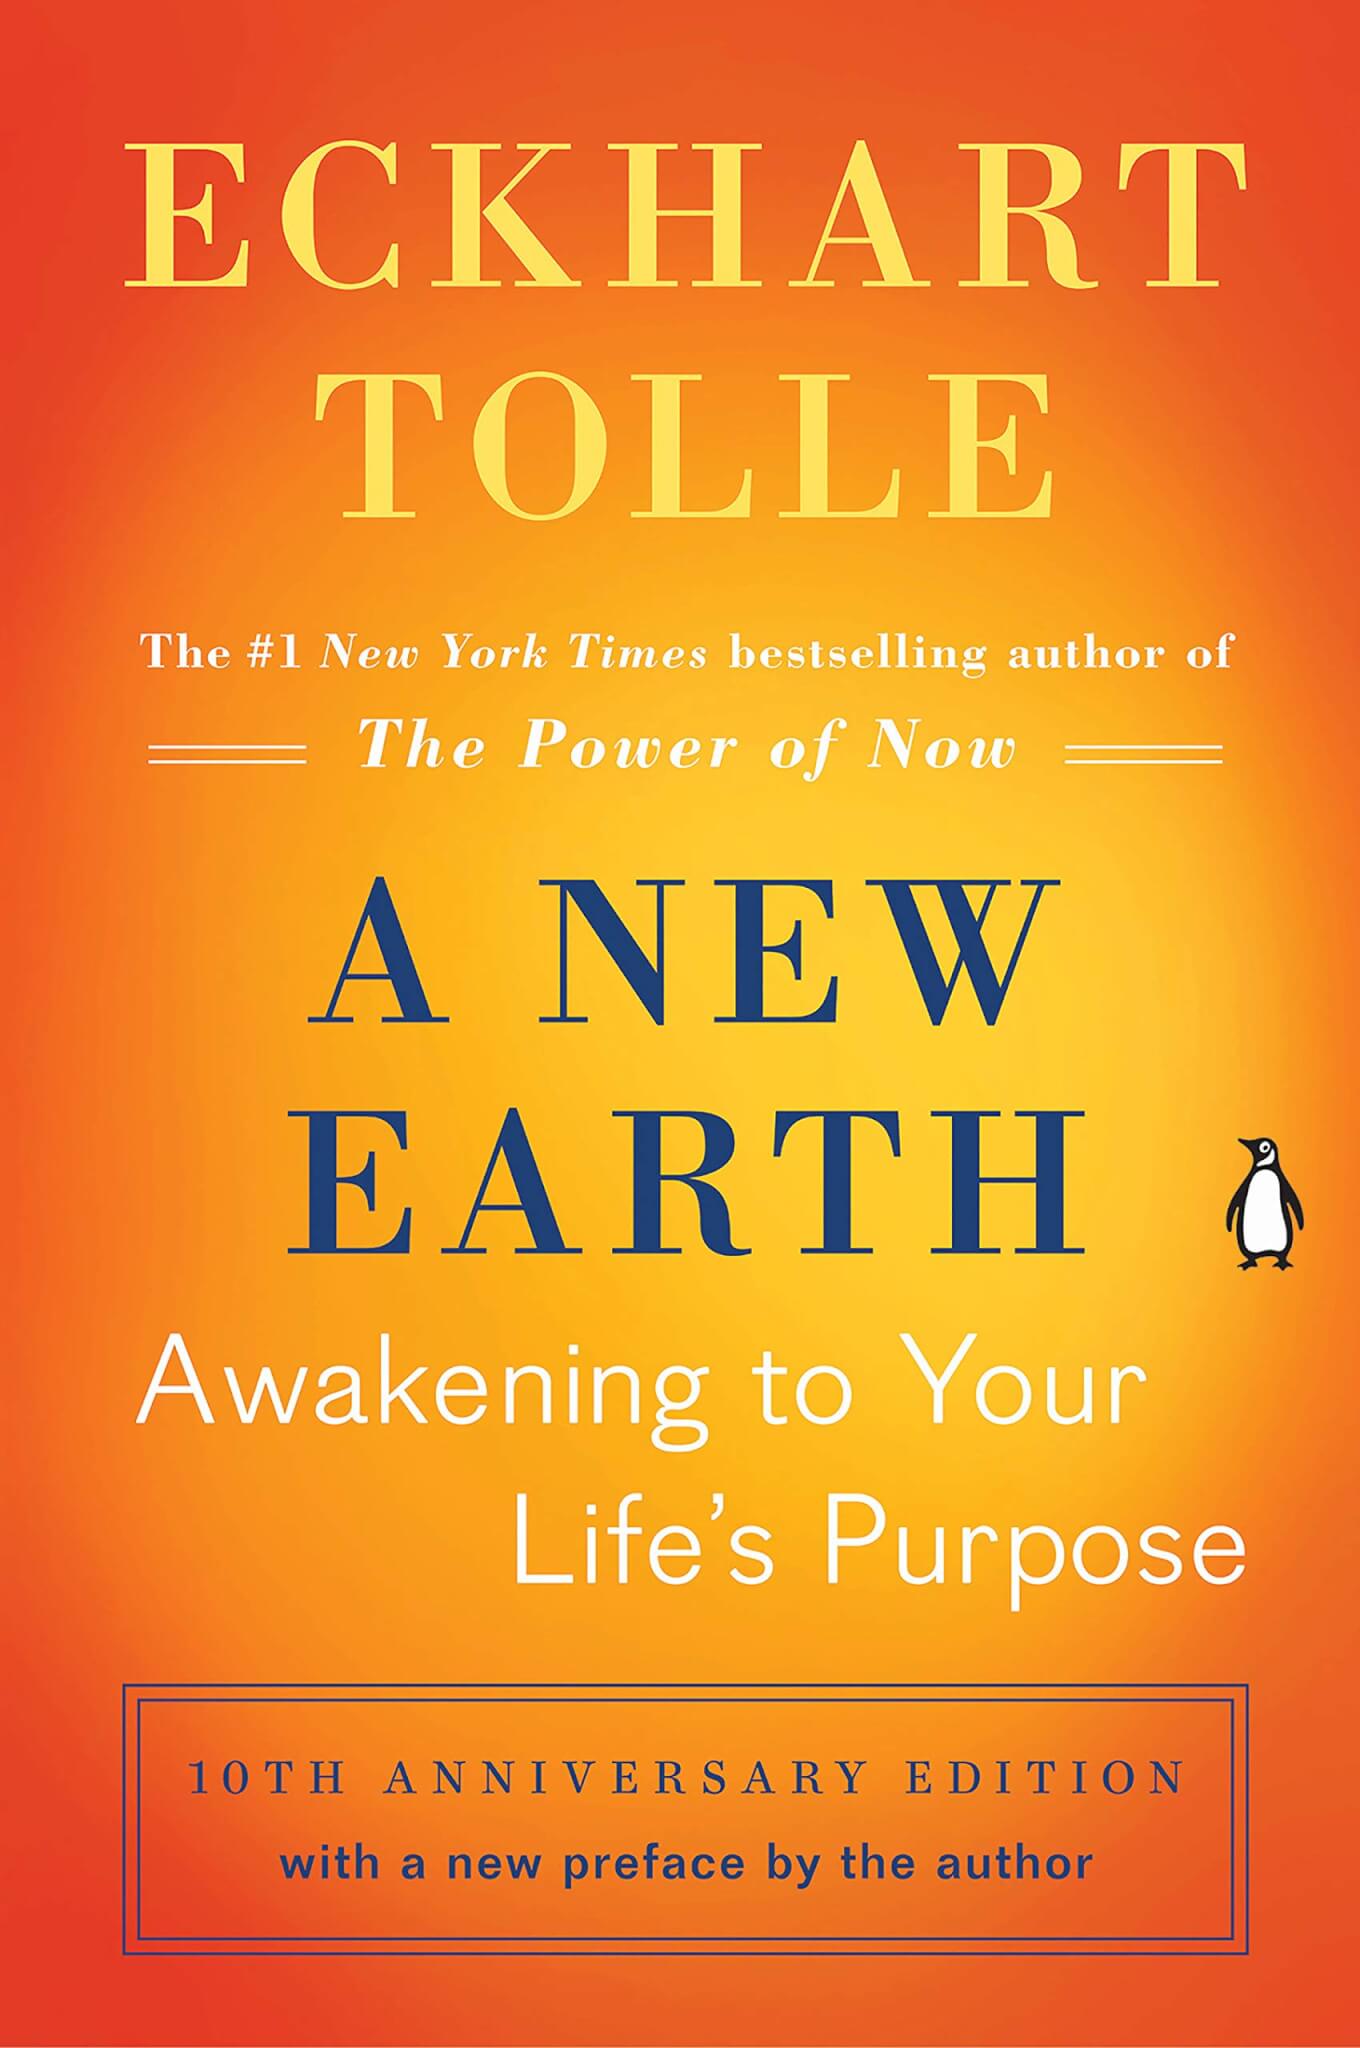 "A New Earth" by Eckhart Tolle